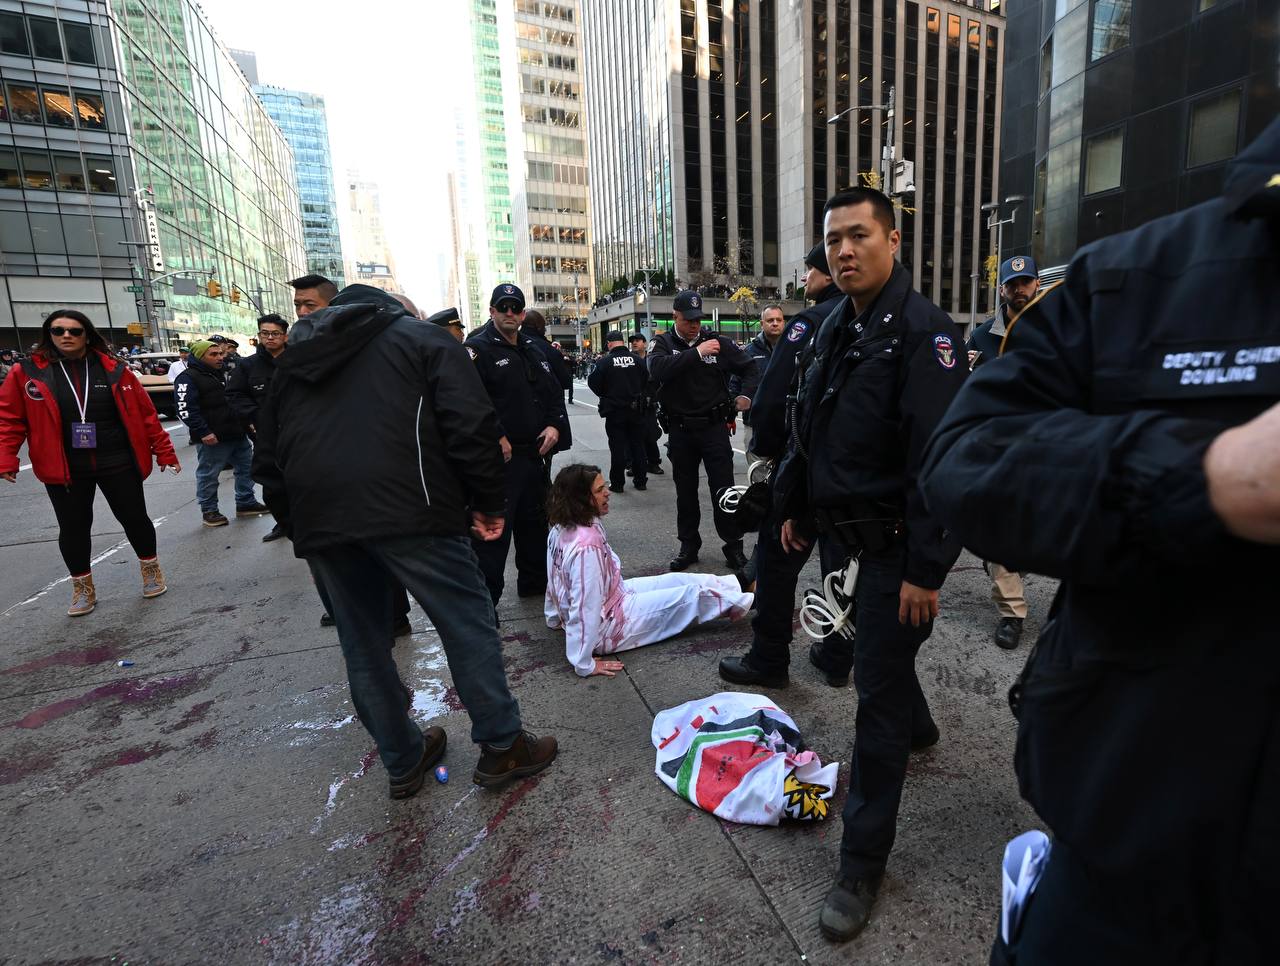 aa-20231123-33003646-33003627-police-arrest-propalestinian-protesters-in-new-york-city-during-thanksgiving-day-parade.jpg